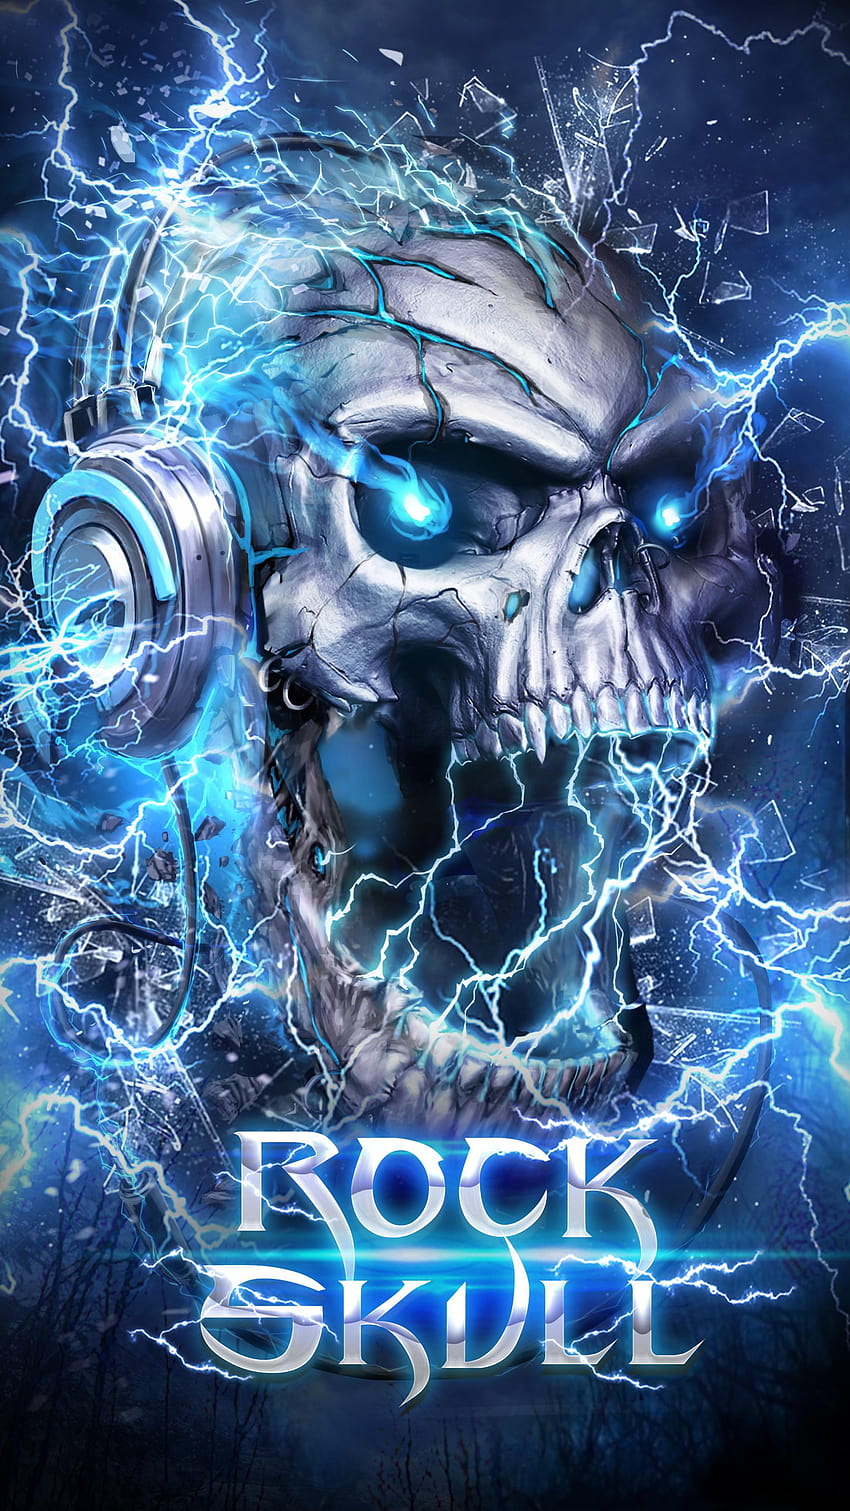 Electric Skull Live for Android, skull blue android HD phone wallpaper